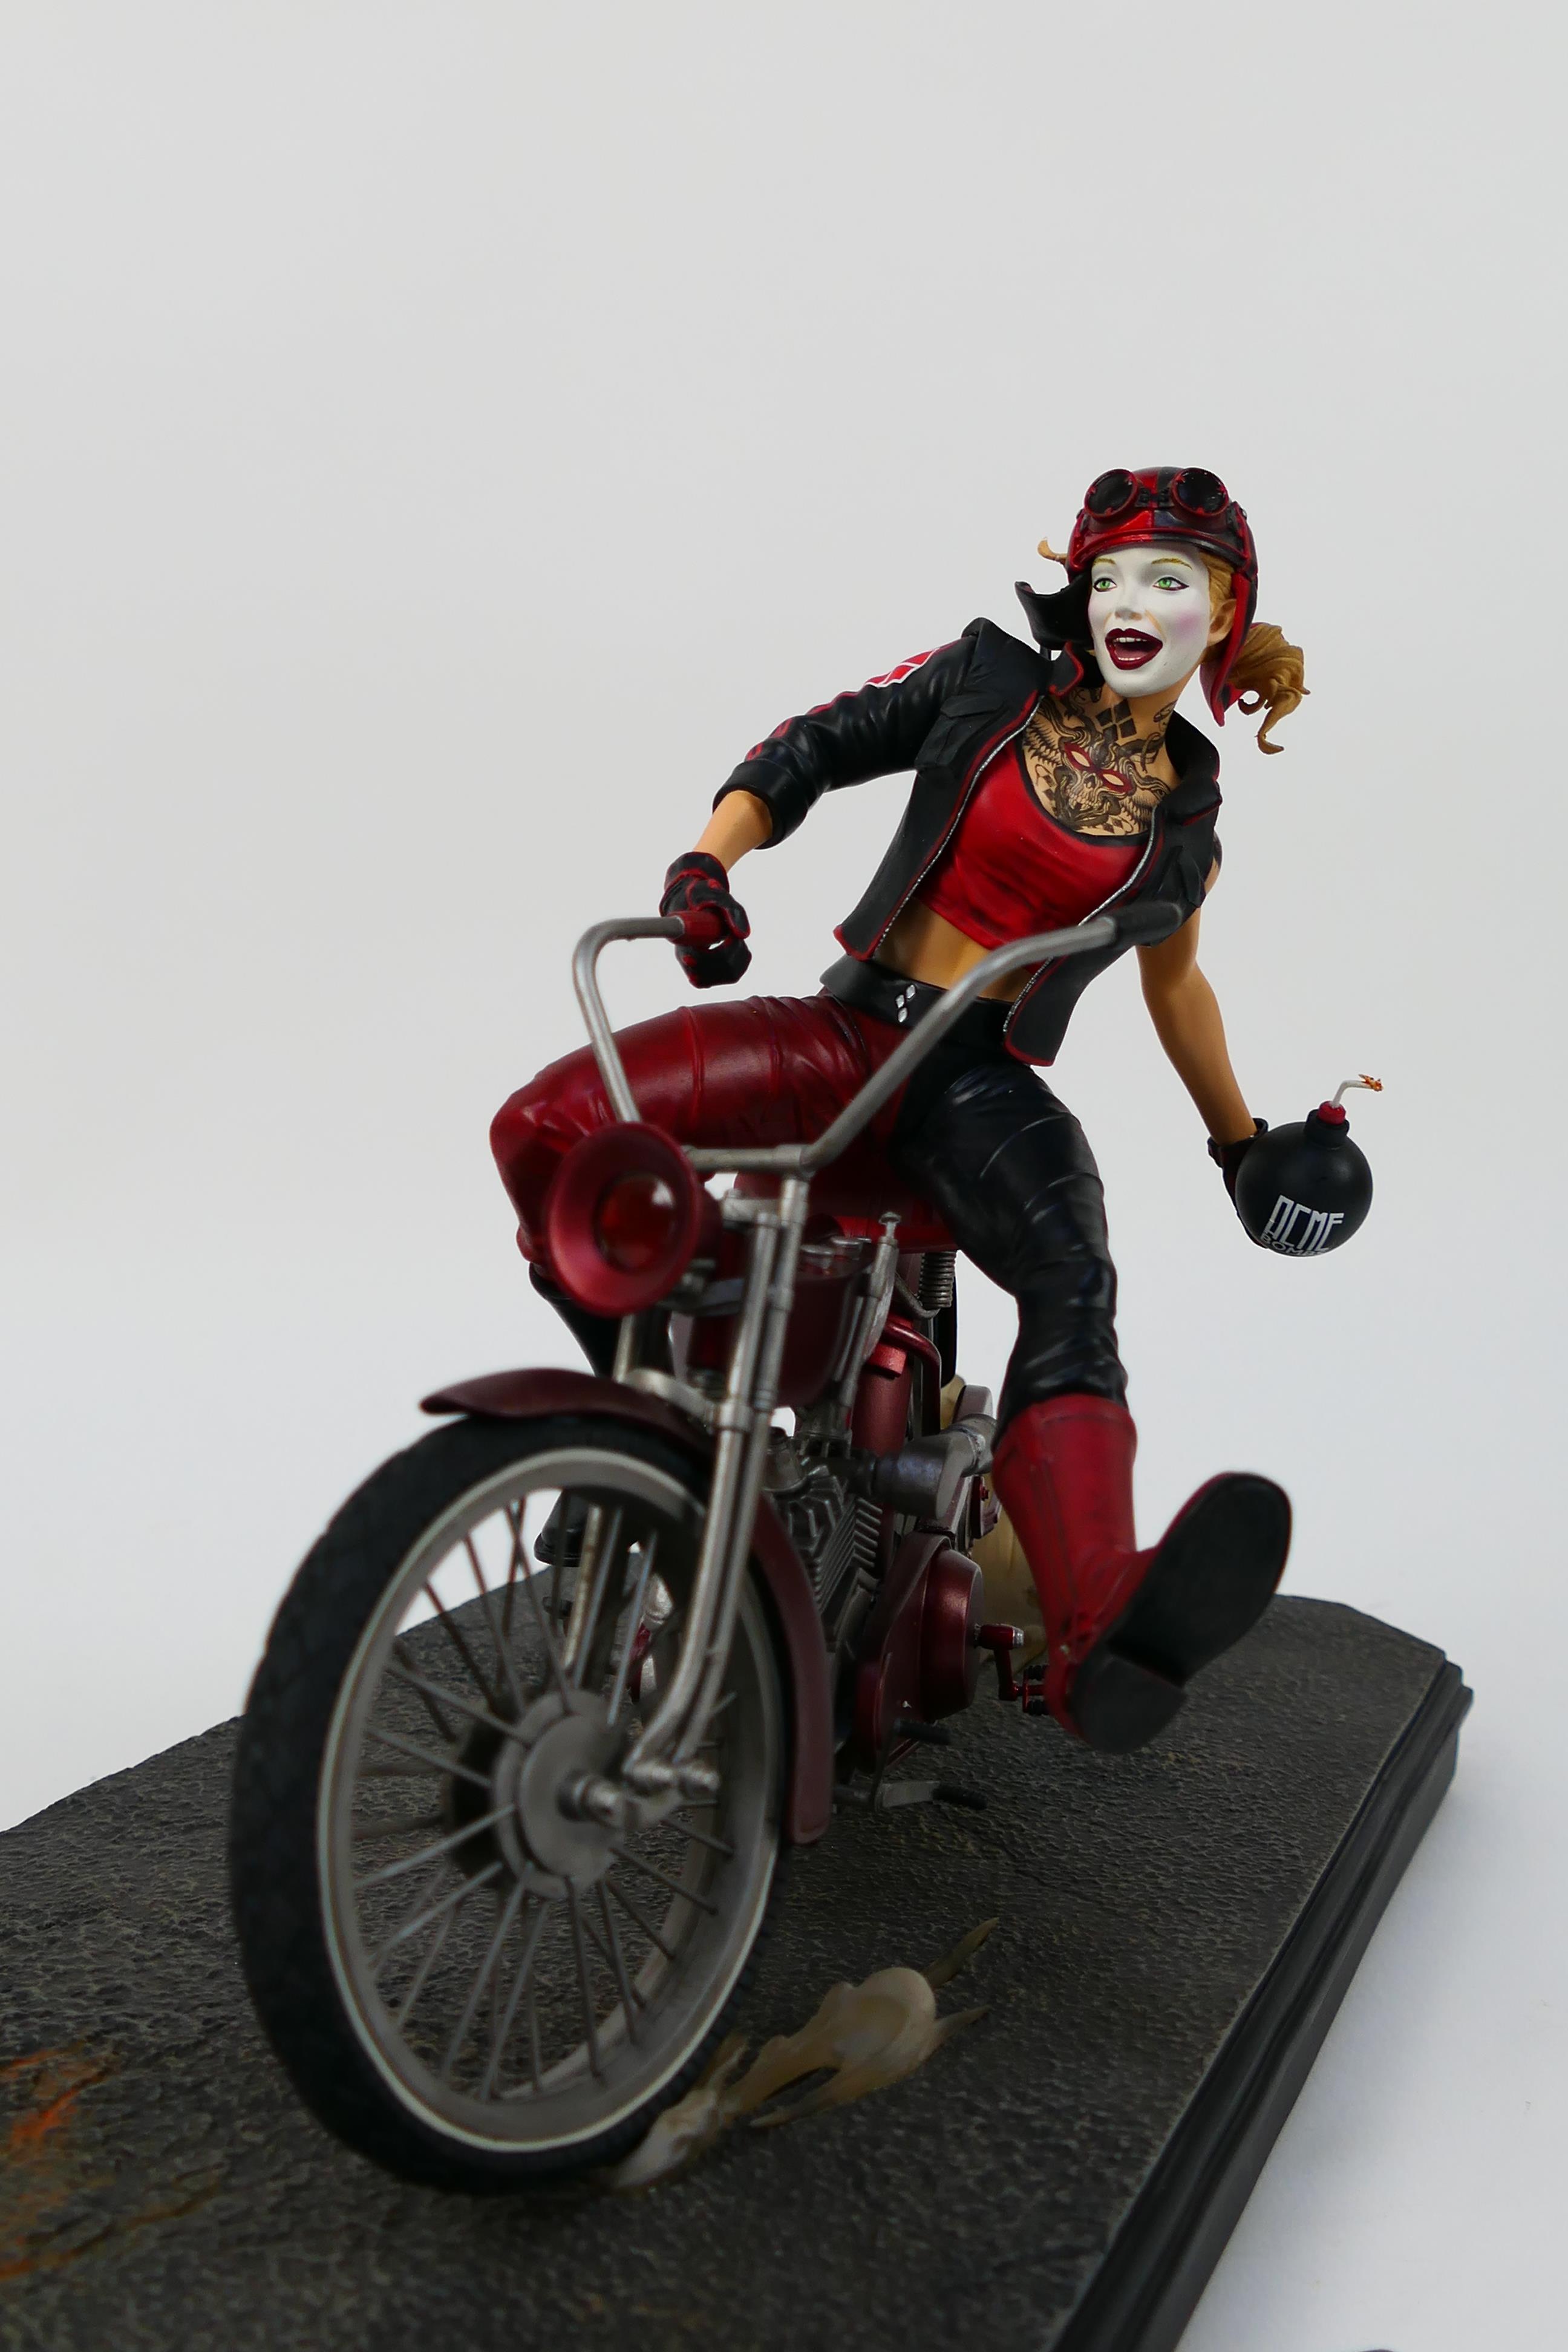 DC Collectibles - Harley Quinn - A limited edition Gotham City Garage Harley Quinn on motorcycle - Image 6 of 8